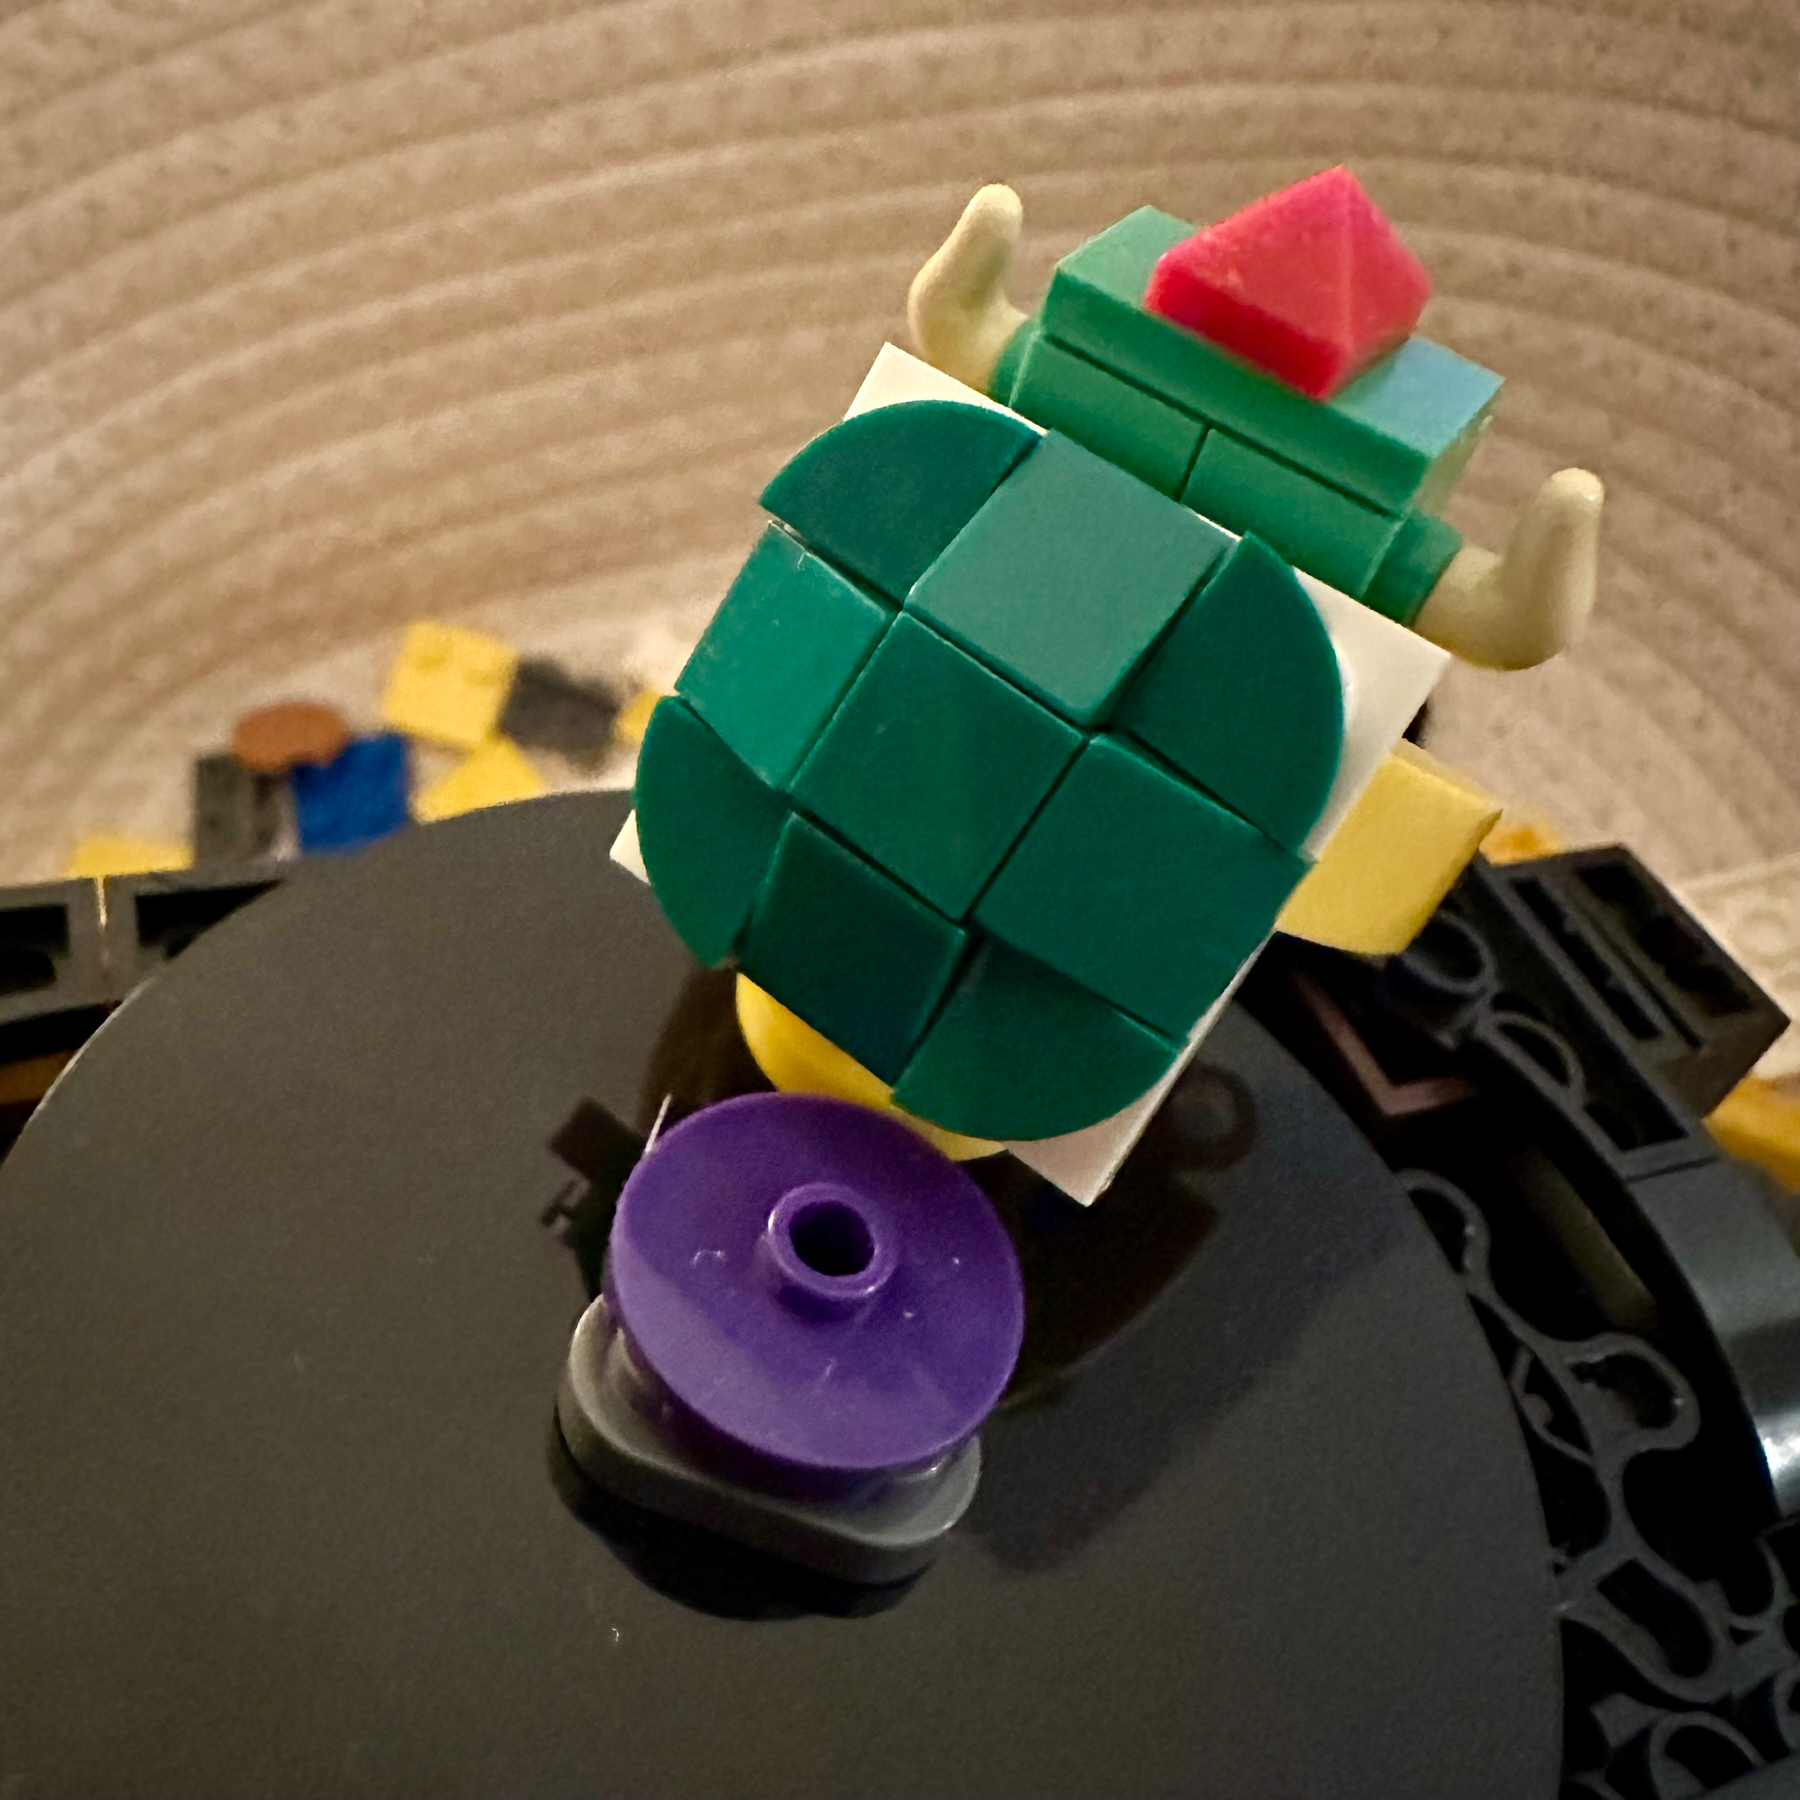 A Lego figure with a green turtle shell backpack and a red accessory on top, positioned on a black and gray base with colorful Lego bricks in the background.